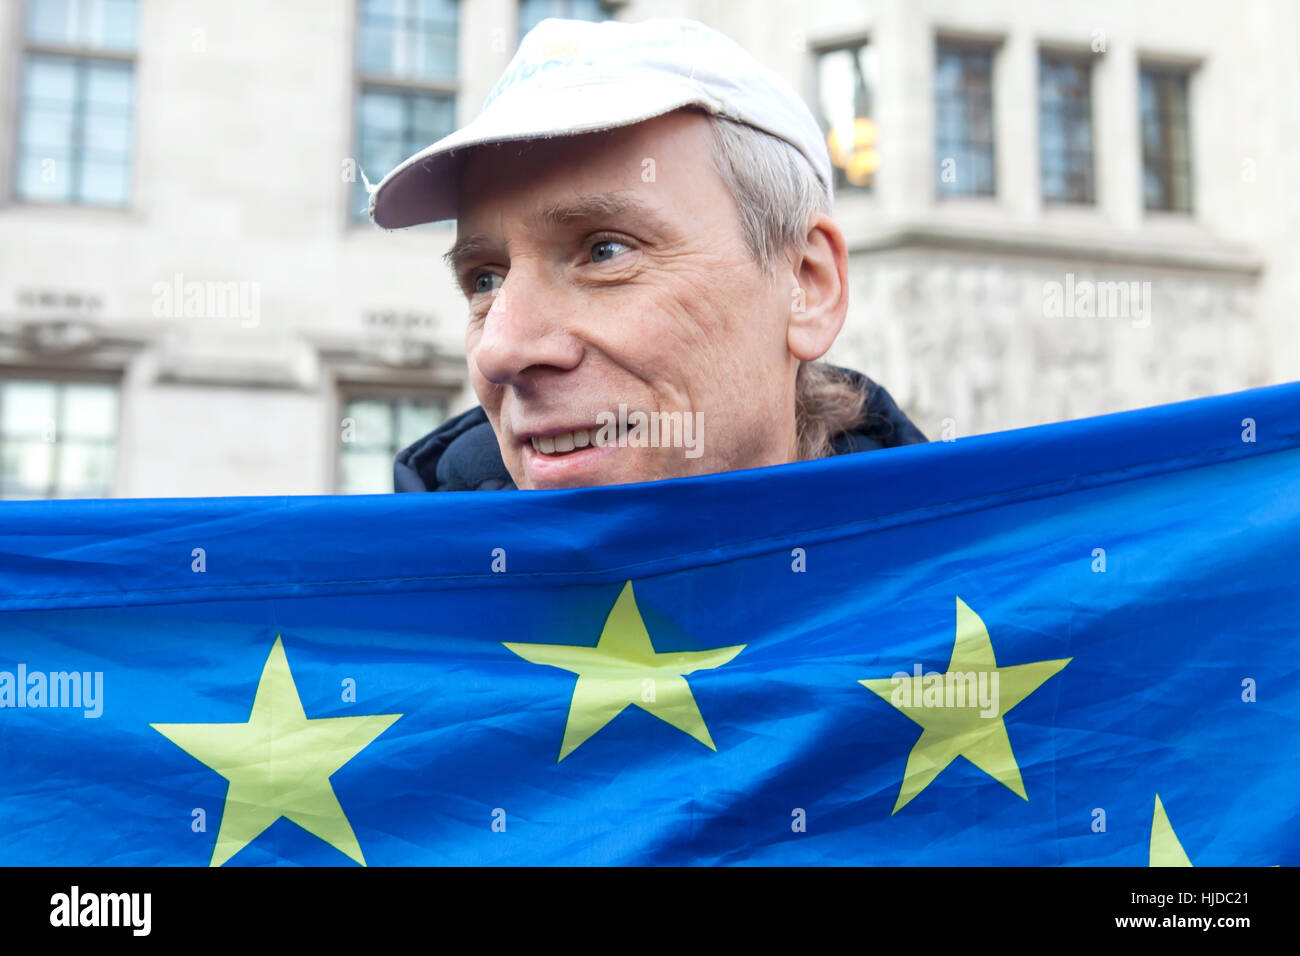 London, UK. 24th Jan, 2017. Verdict of the Supreme Court. The verdict of the Supreme Court was given today. A happy supporter of the Remain campaign with his flag. Credit: Jane Campbell/Alamy Live News Stock Photo